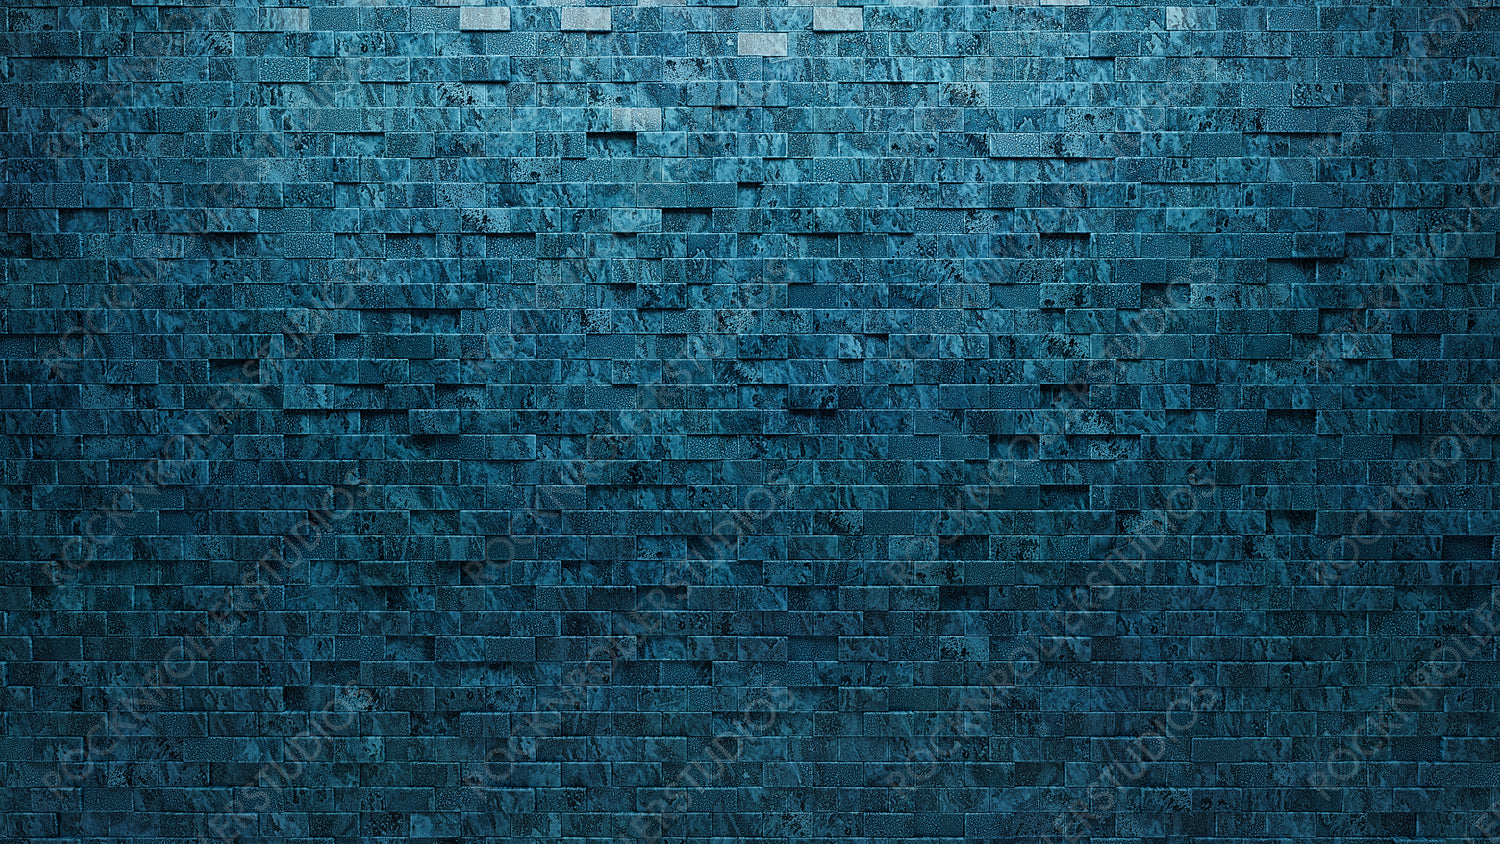 Blue Patina, Polished Wall background with tiles. Rectangular, tile Wallpaper with 3D, Textured blocks. 3D Render